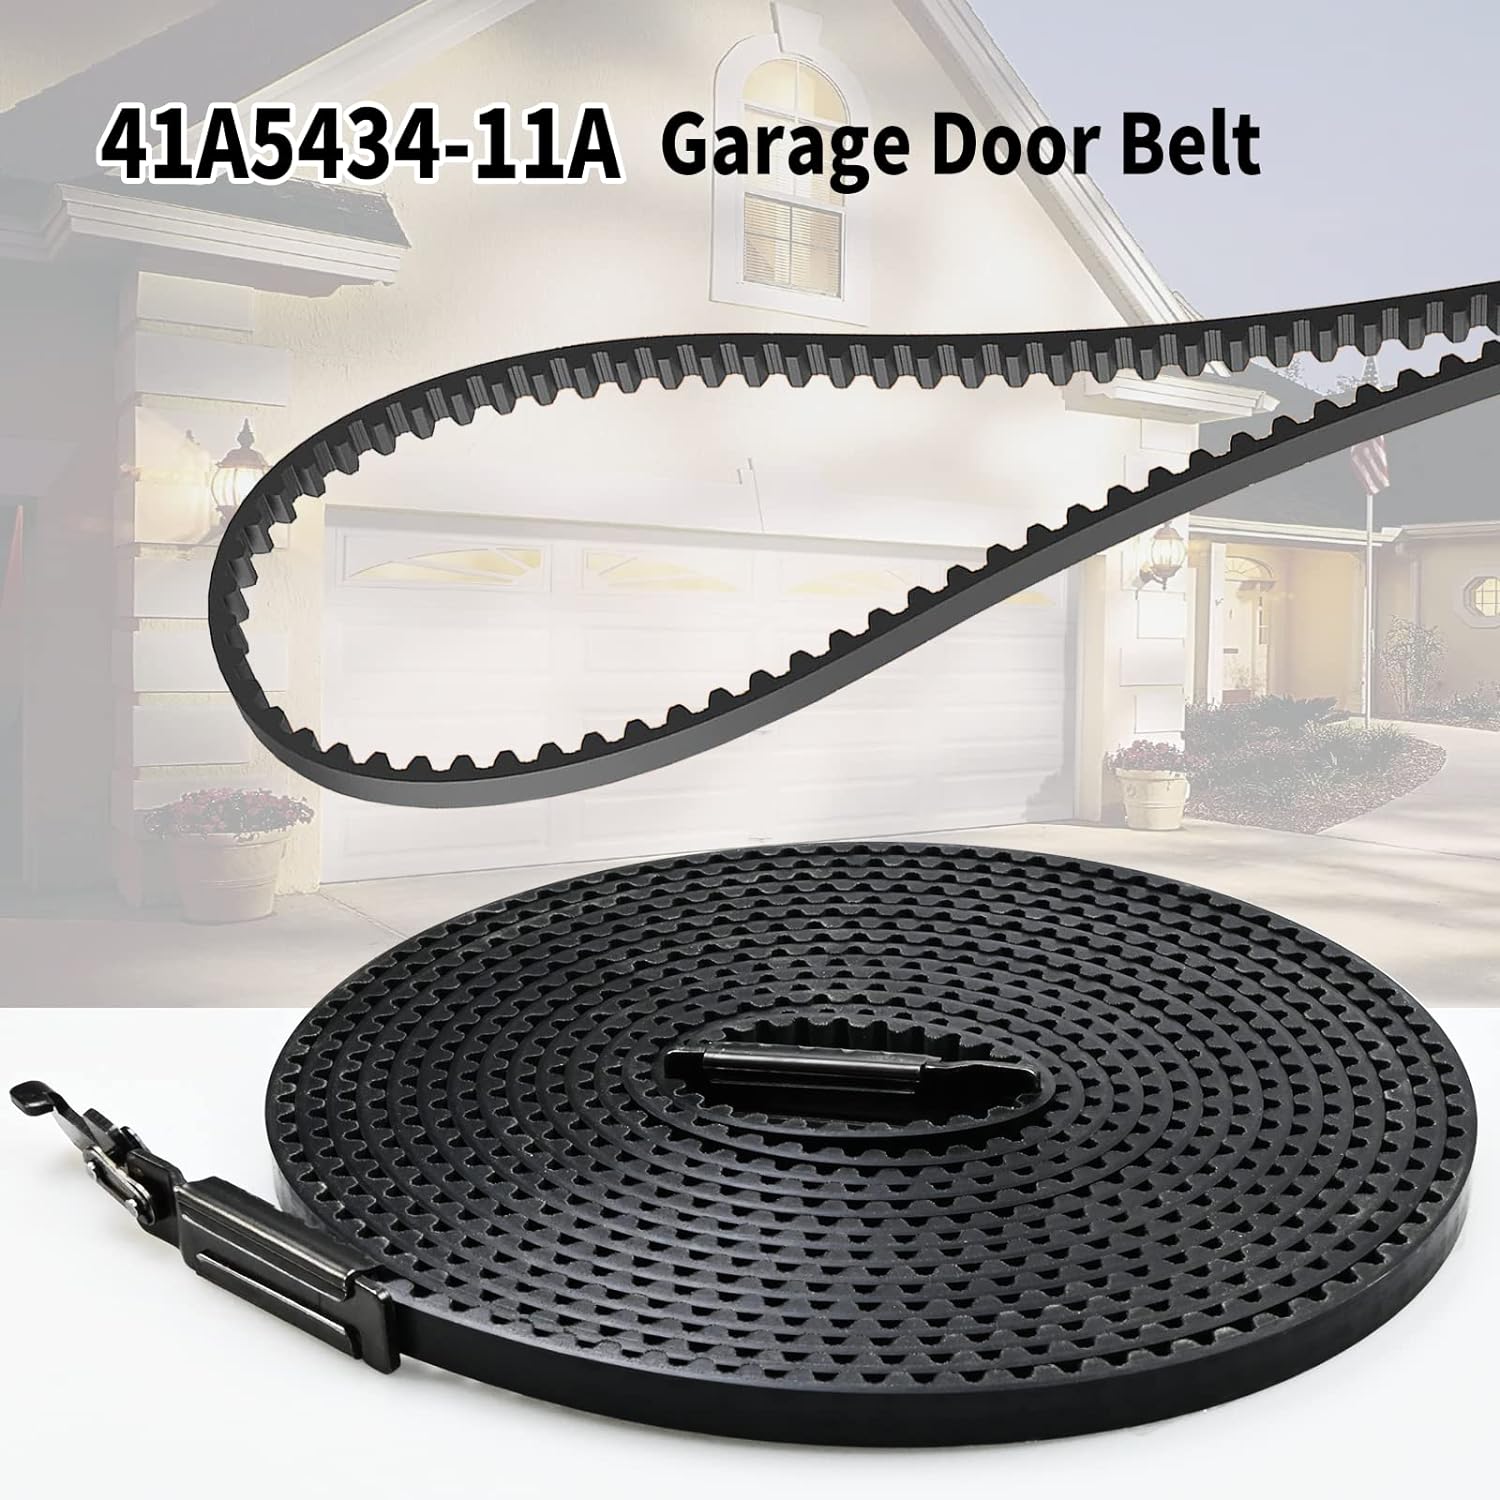 Generic Upgraded Drive Belt 41A5434-11A for 7ft Chamberlain Craftsman Garage Door Opener Belt Assembly, Compatible with Liftmaster/Cham